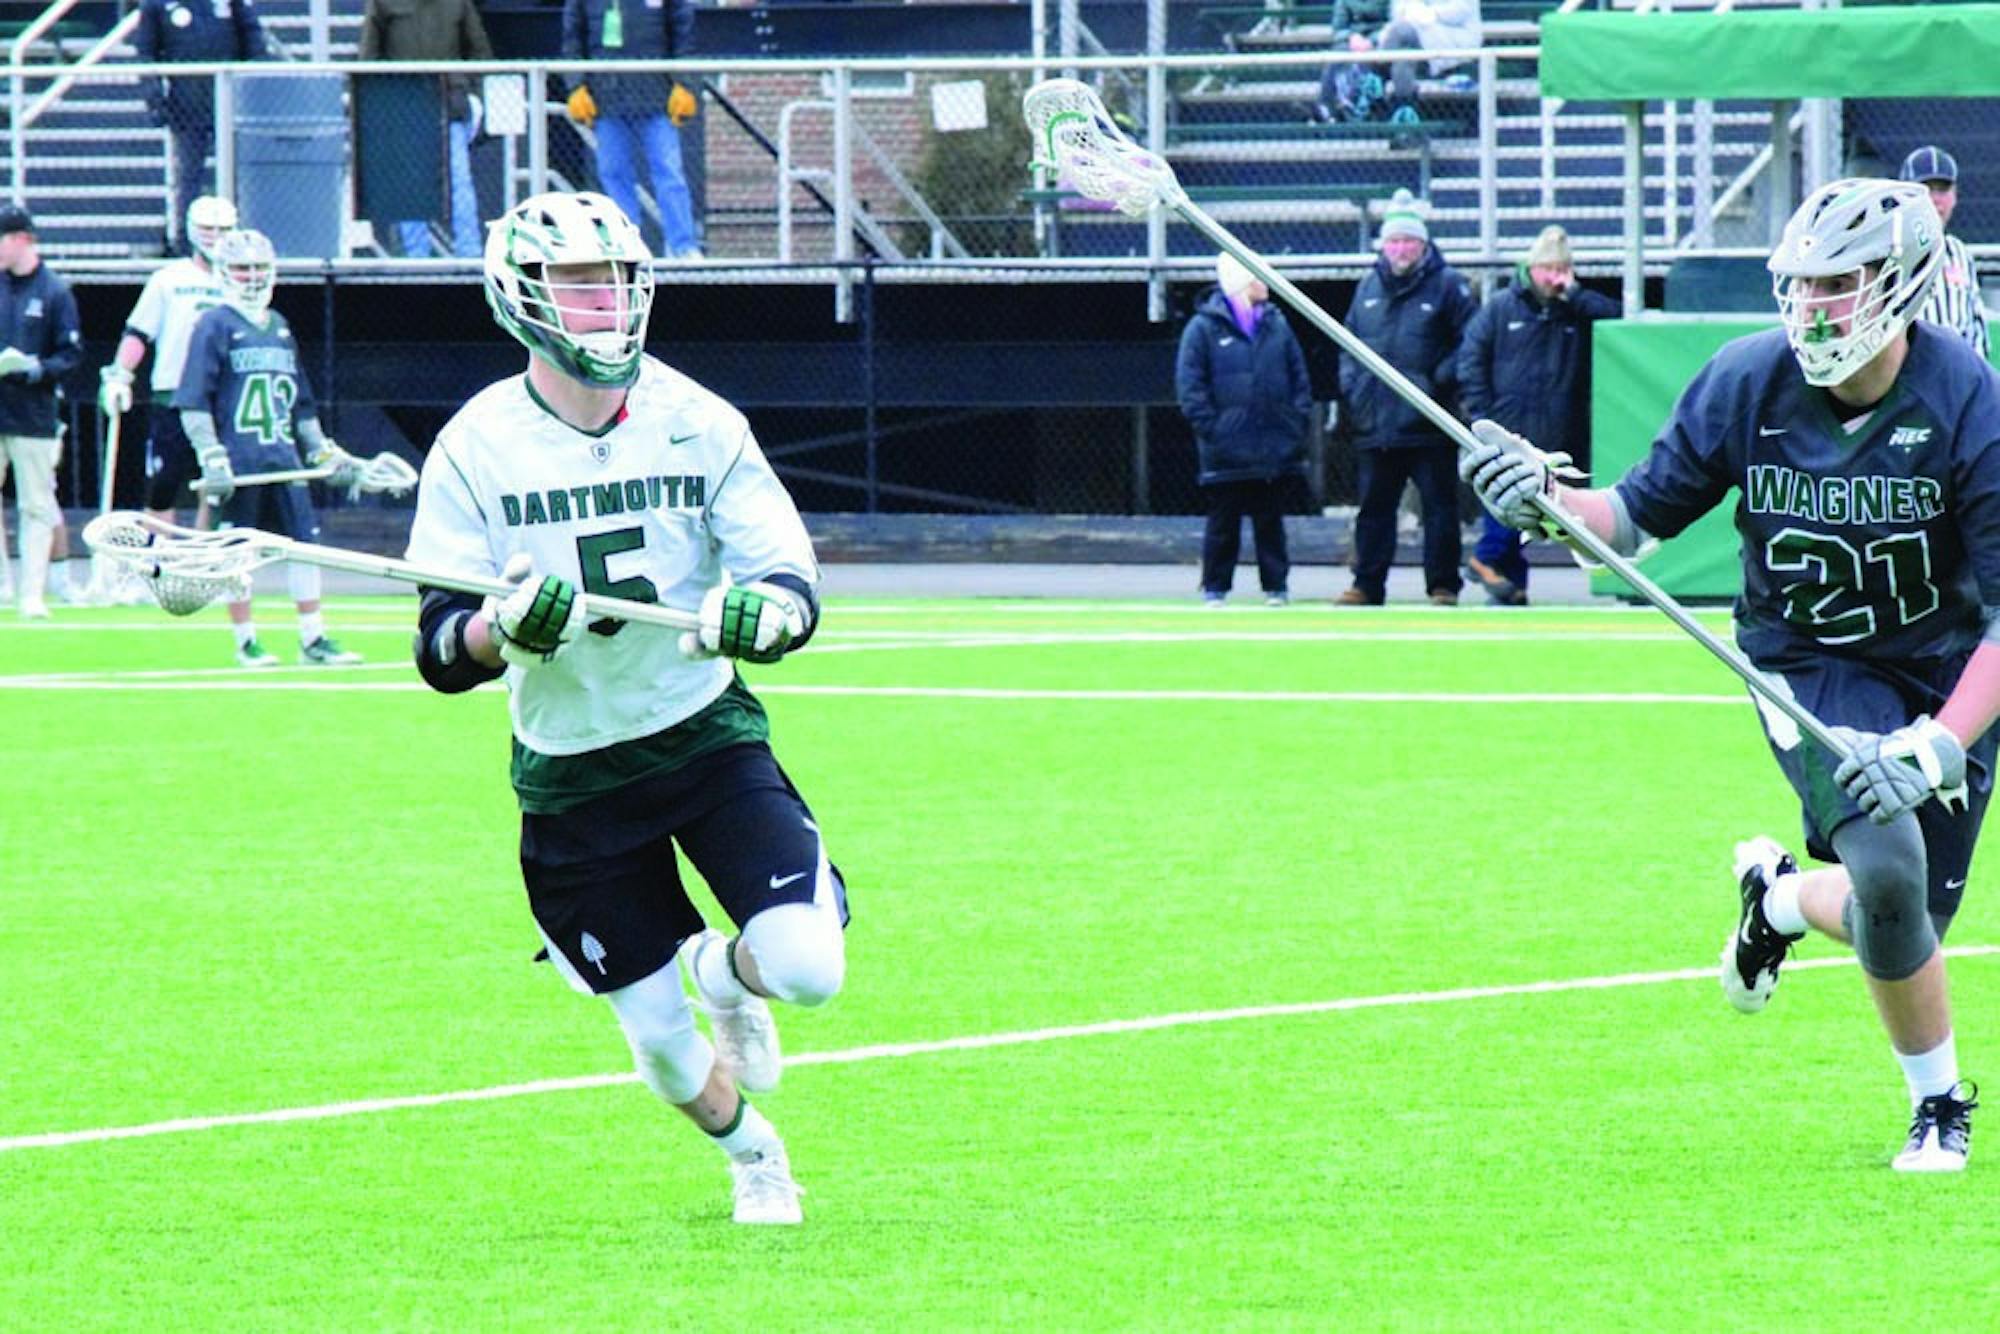 Ben Martin '20 put in four goals against Wagner University, including the go-ahead marker, and now leads the team with nine.